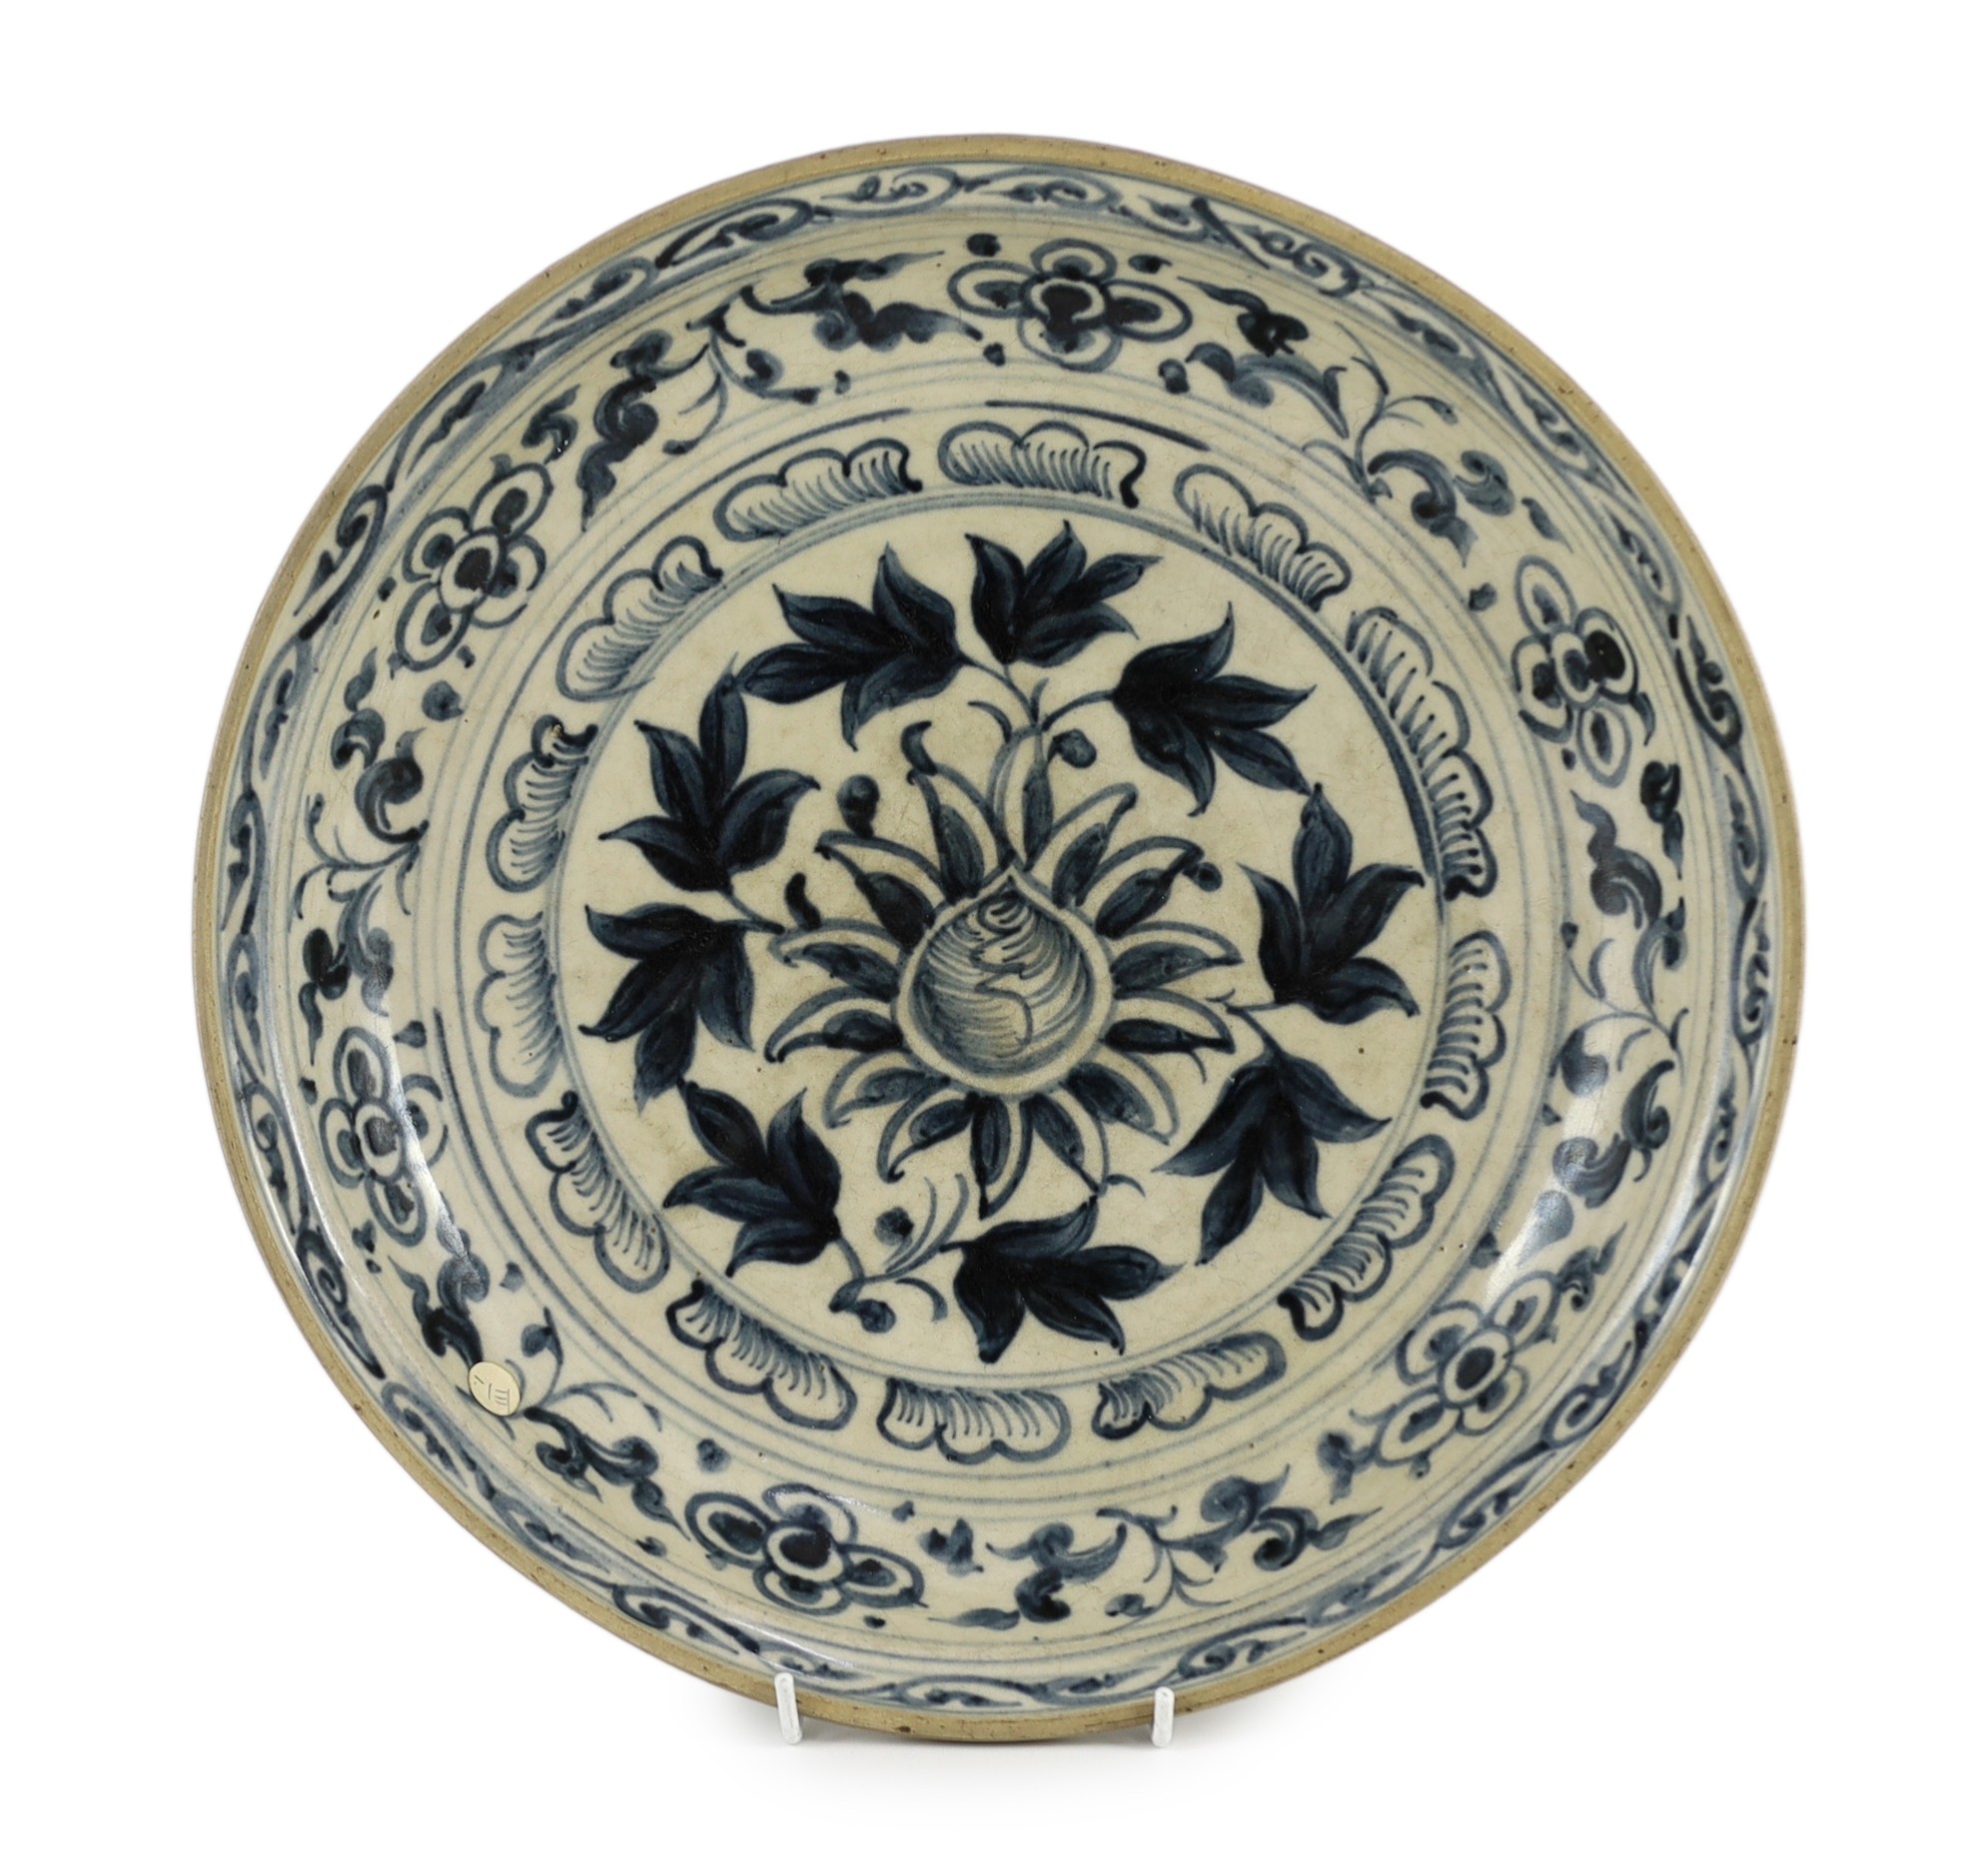 A large Annamese blue and white dish, 16th century, the centre painted with a flower and broad